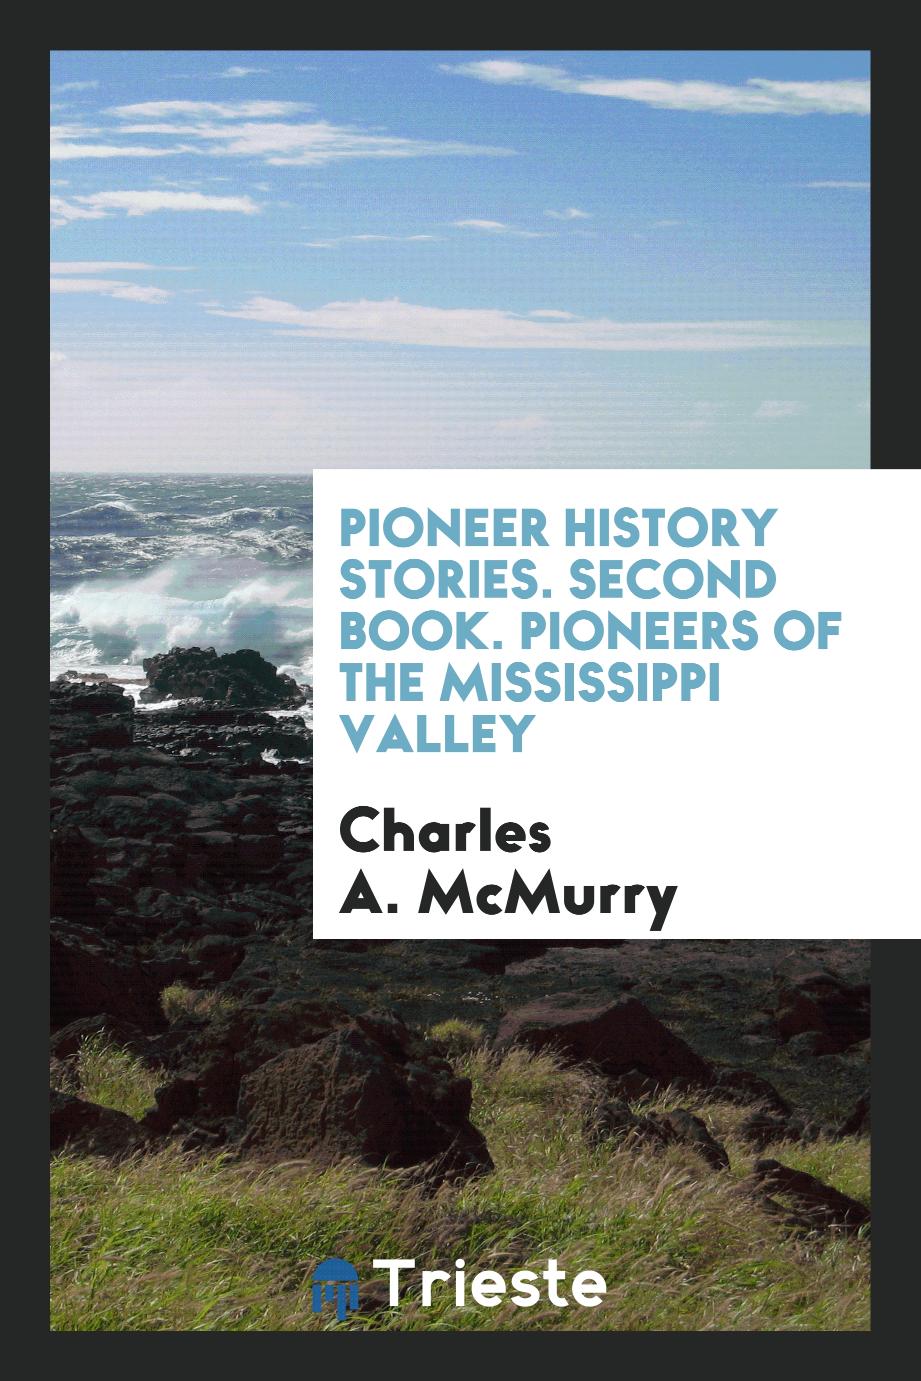 Pioneer History Stories. Second Book. Pioneers of the Mississippi Valley